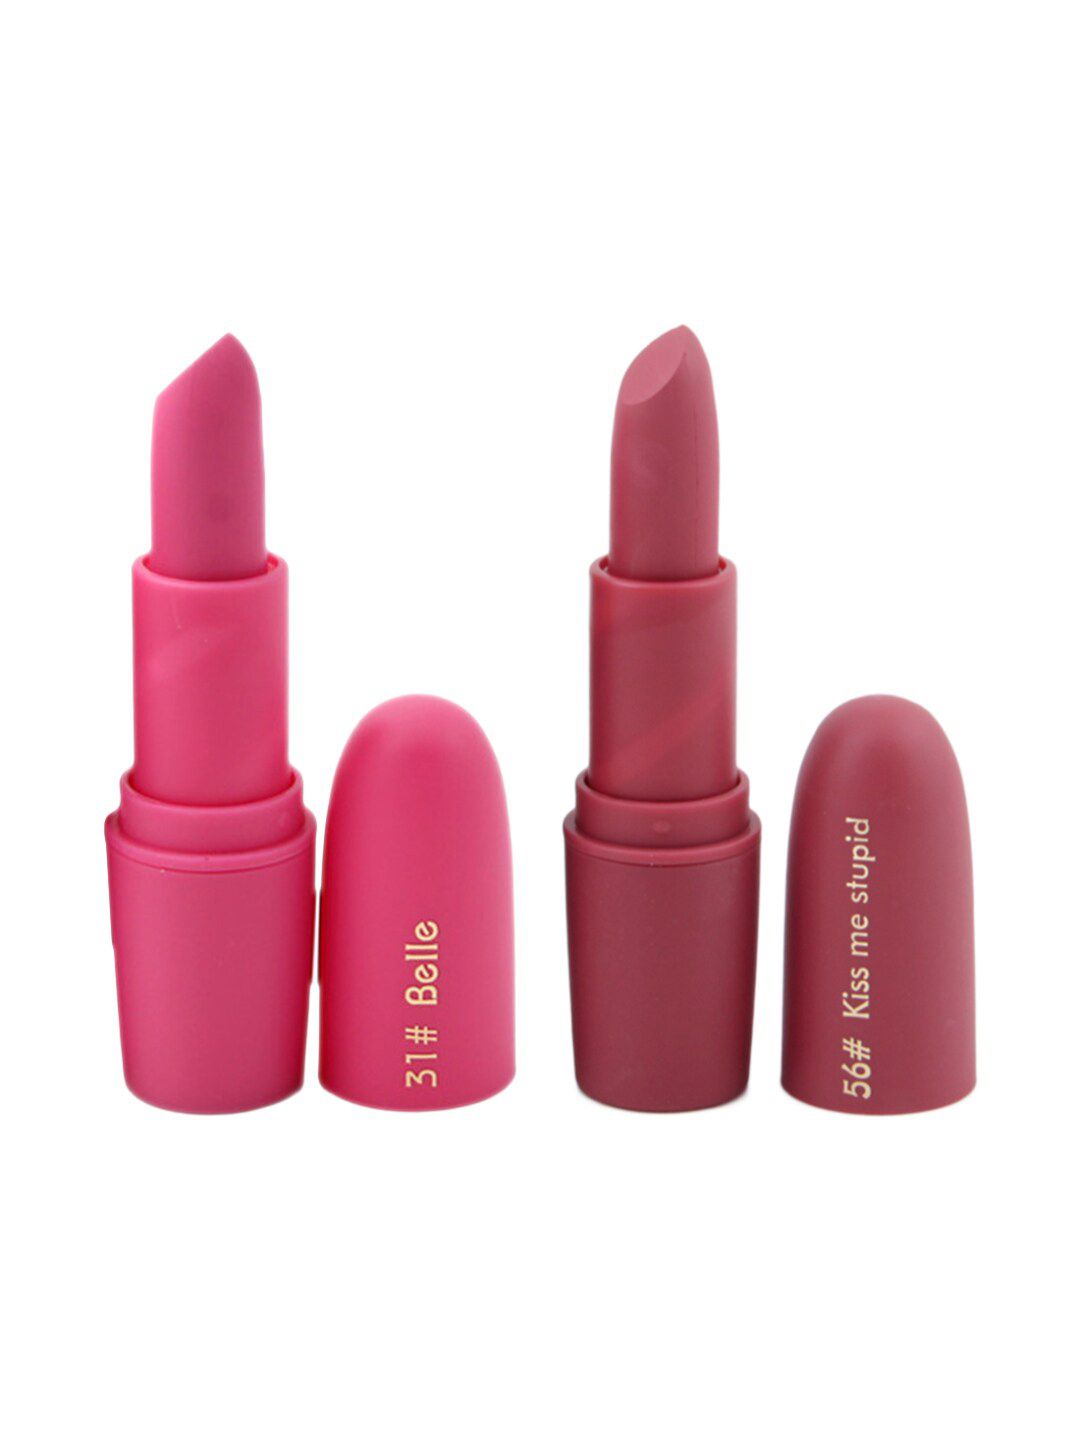 MISS ROSE Set of 2 Matte Creamy Lipsticks - Belle 31 & Kiss Me Stupid 56 Price in India